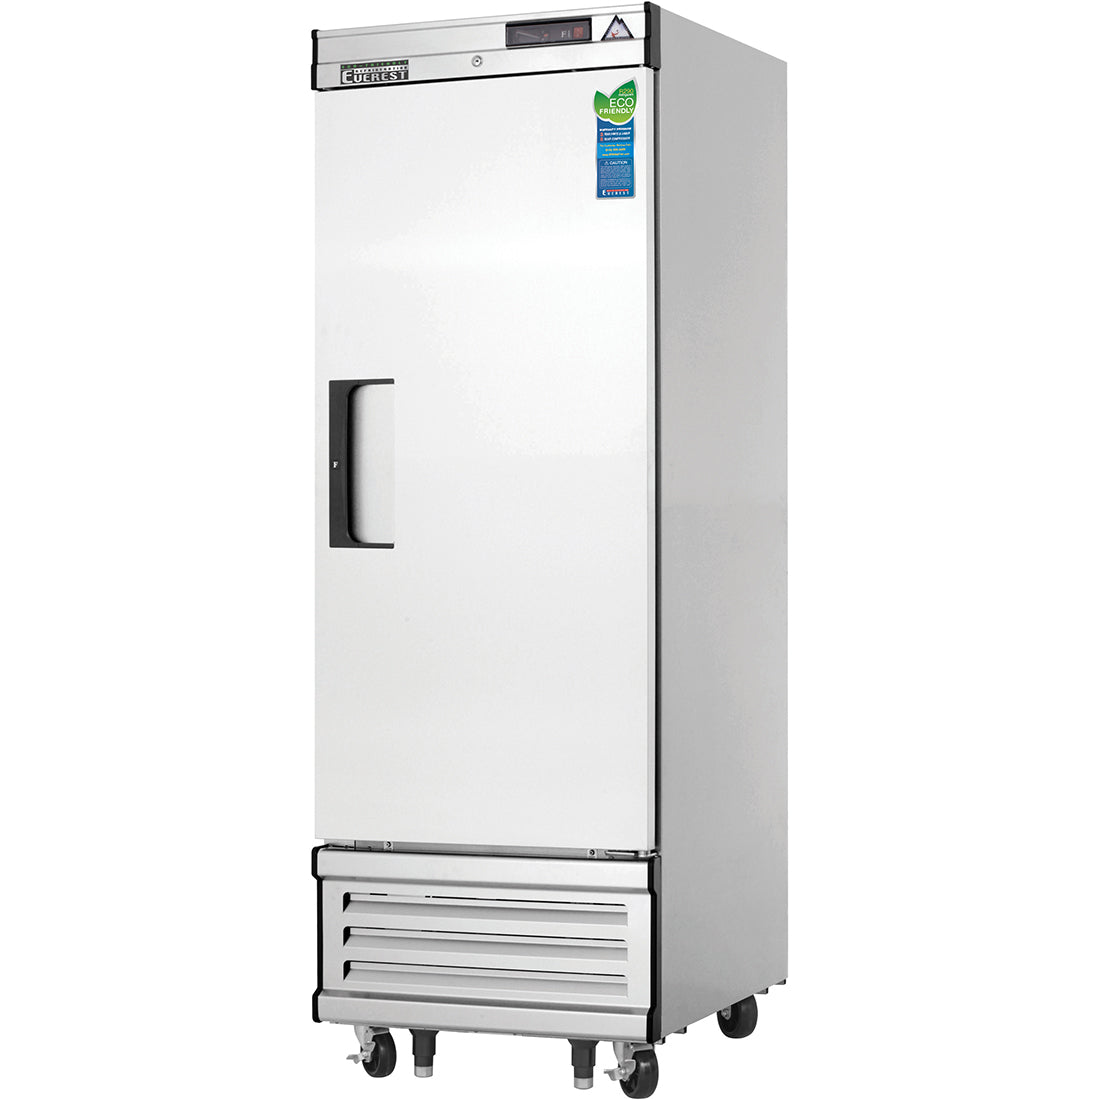 Everest EB Series-EBF1 One Section Solid Door Upright Reach-In Freezer - 21 Cu. Ft.